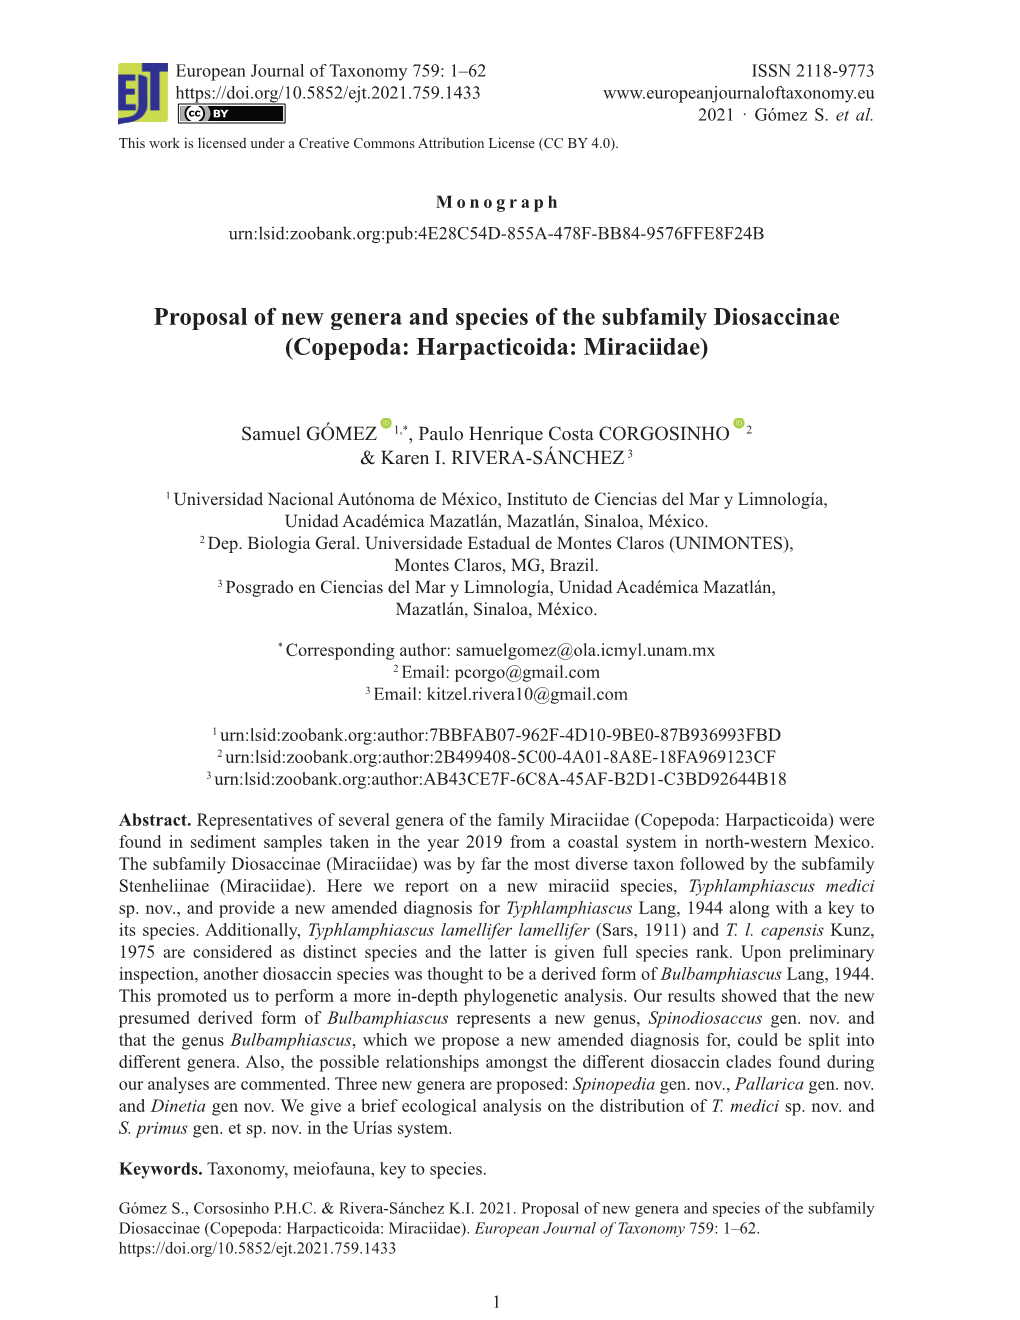 Proposal of New Genera and Species of the Subfamily Diosaccinae (Copepoda: Harpacticoida: Miraciidae)